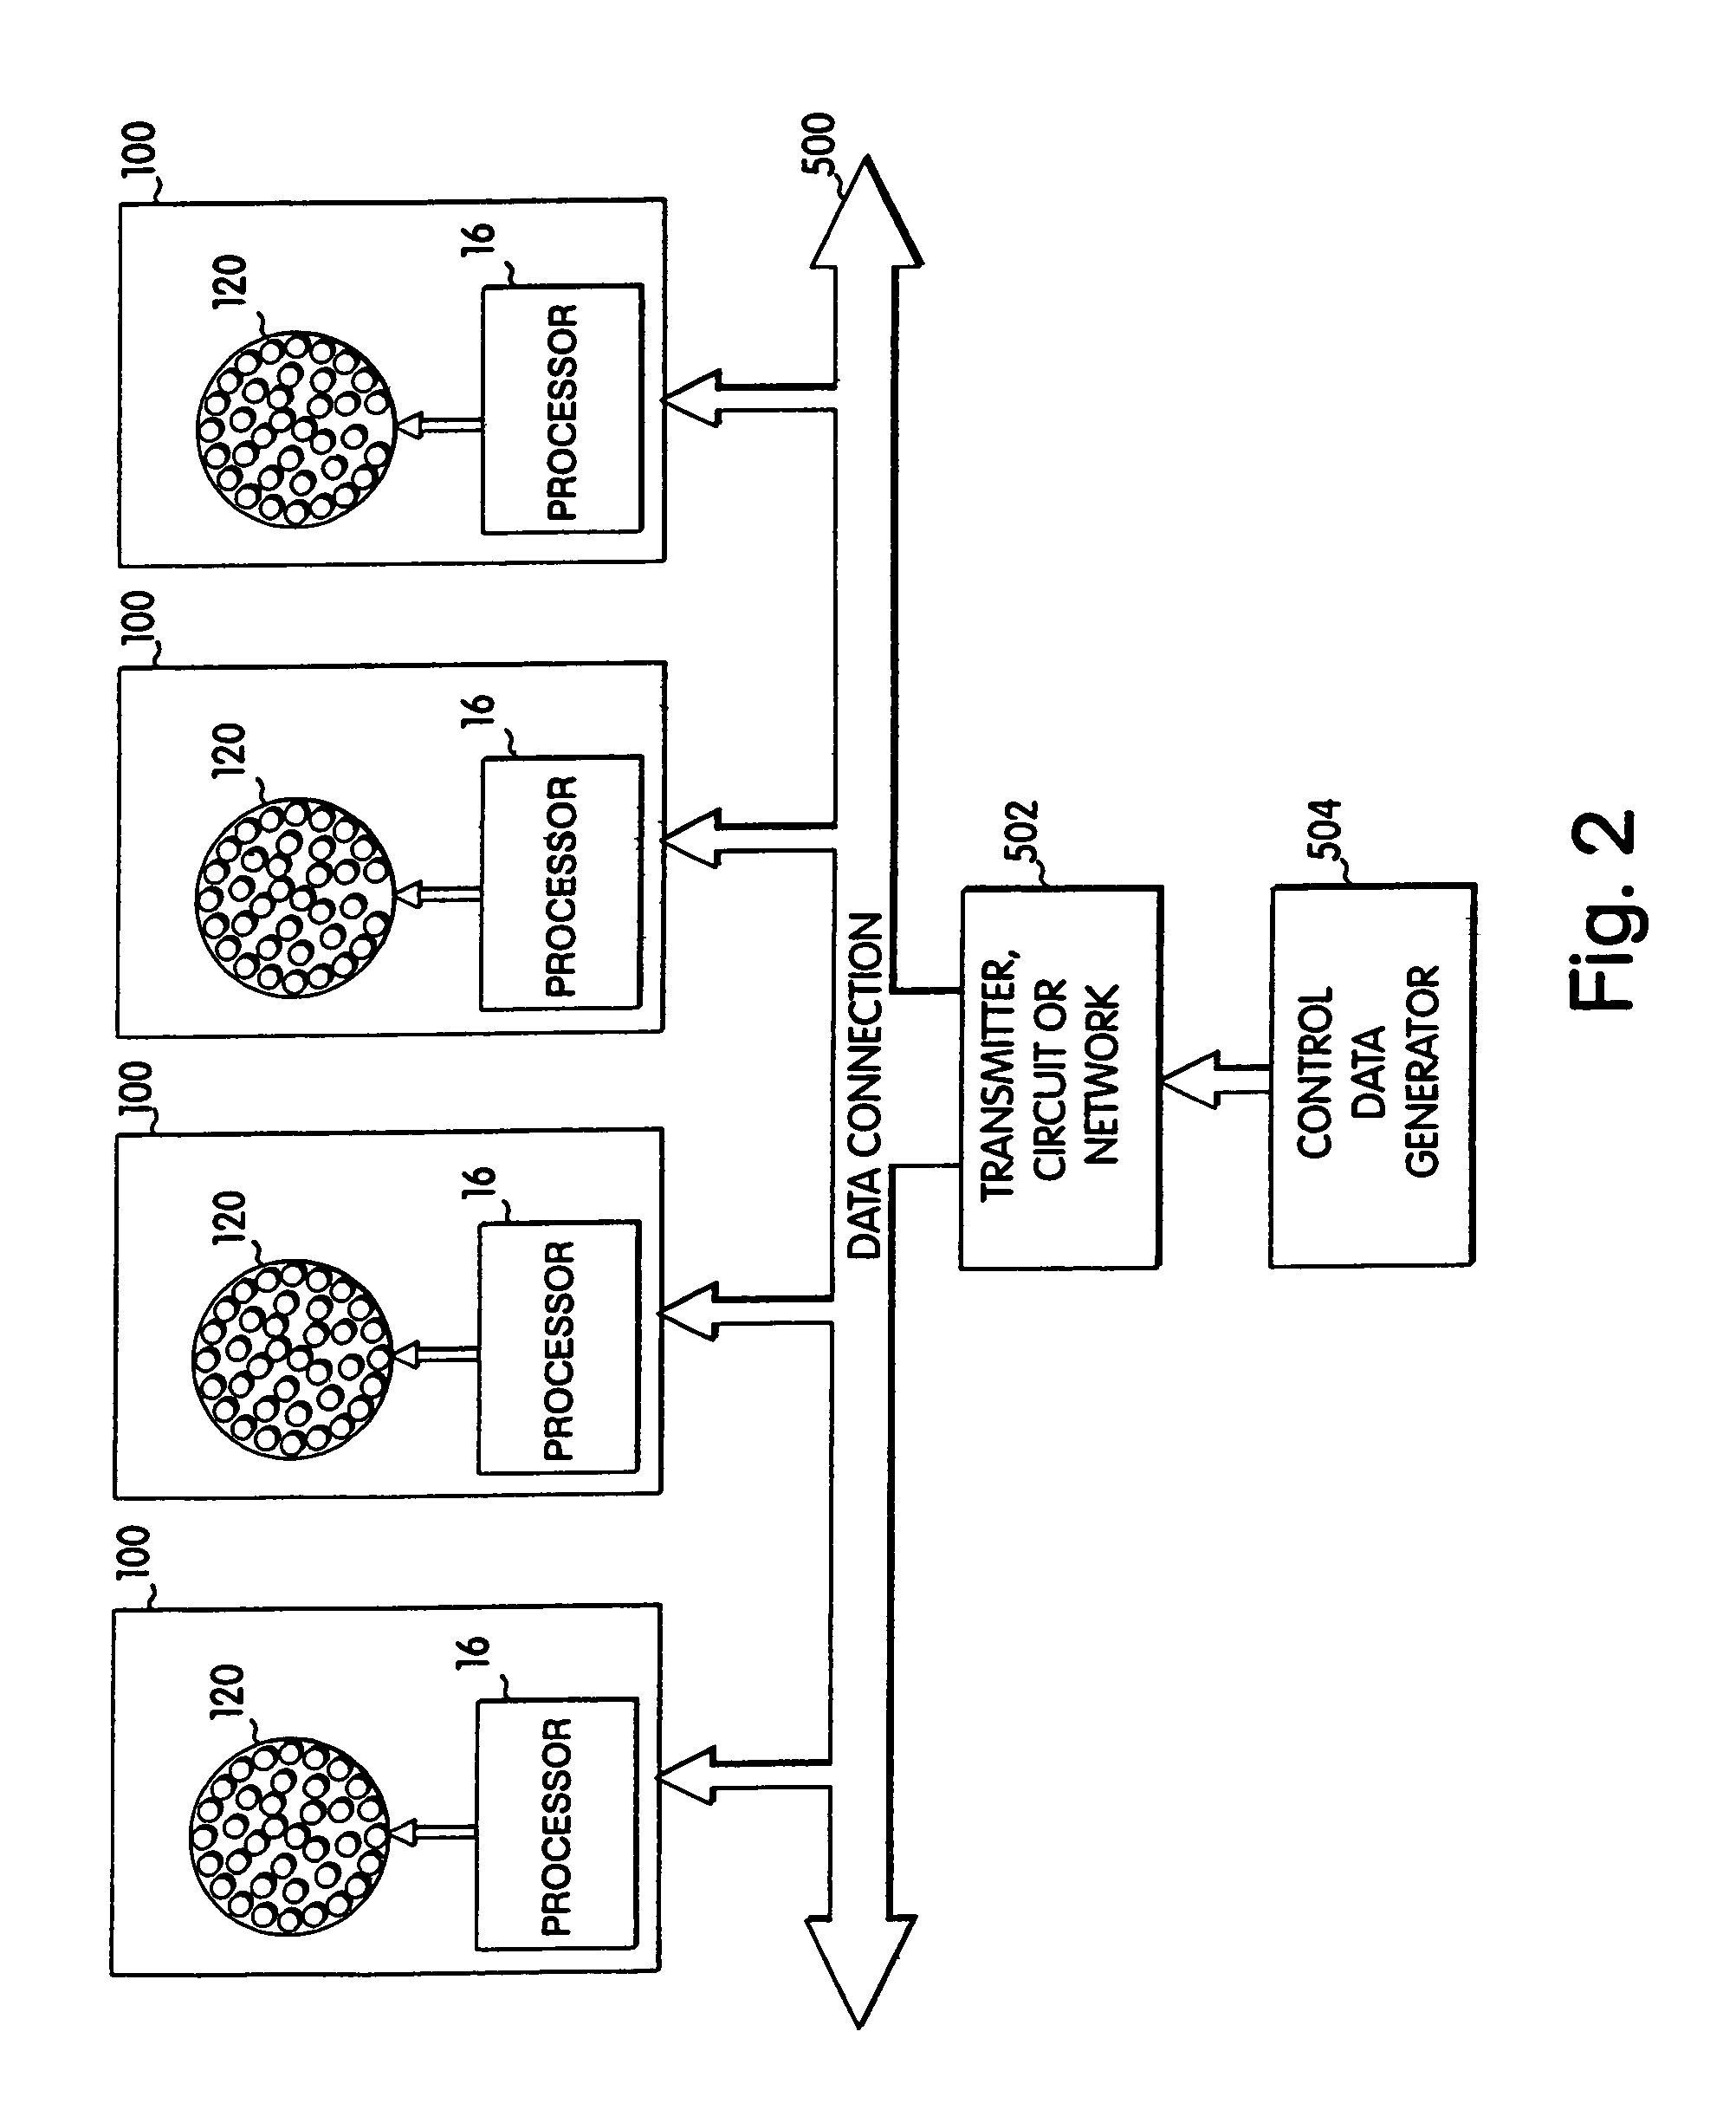 Diffuse illumination systems and methods